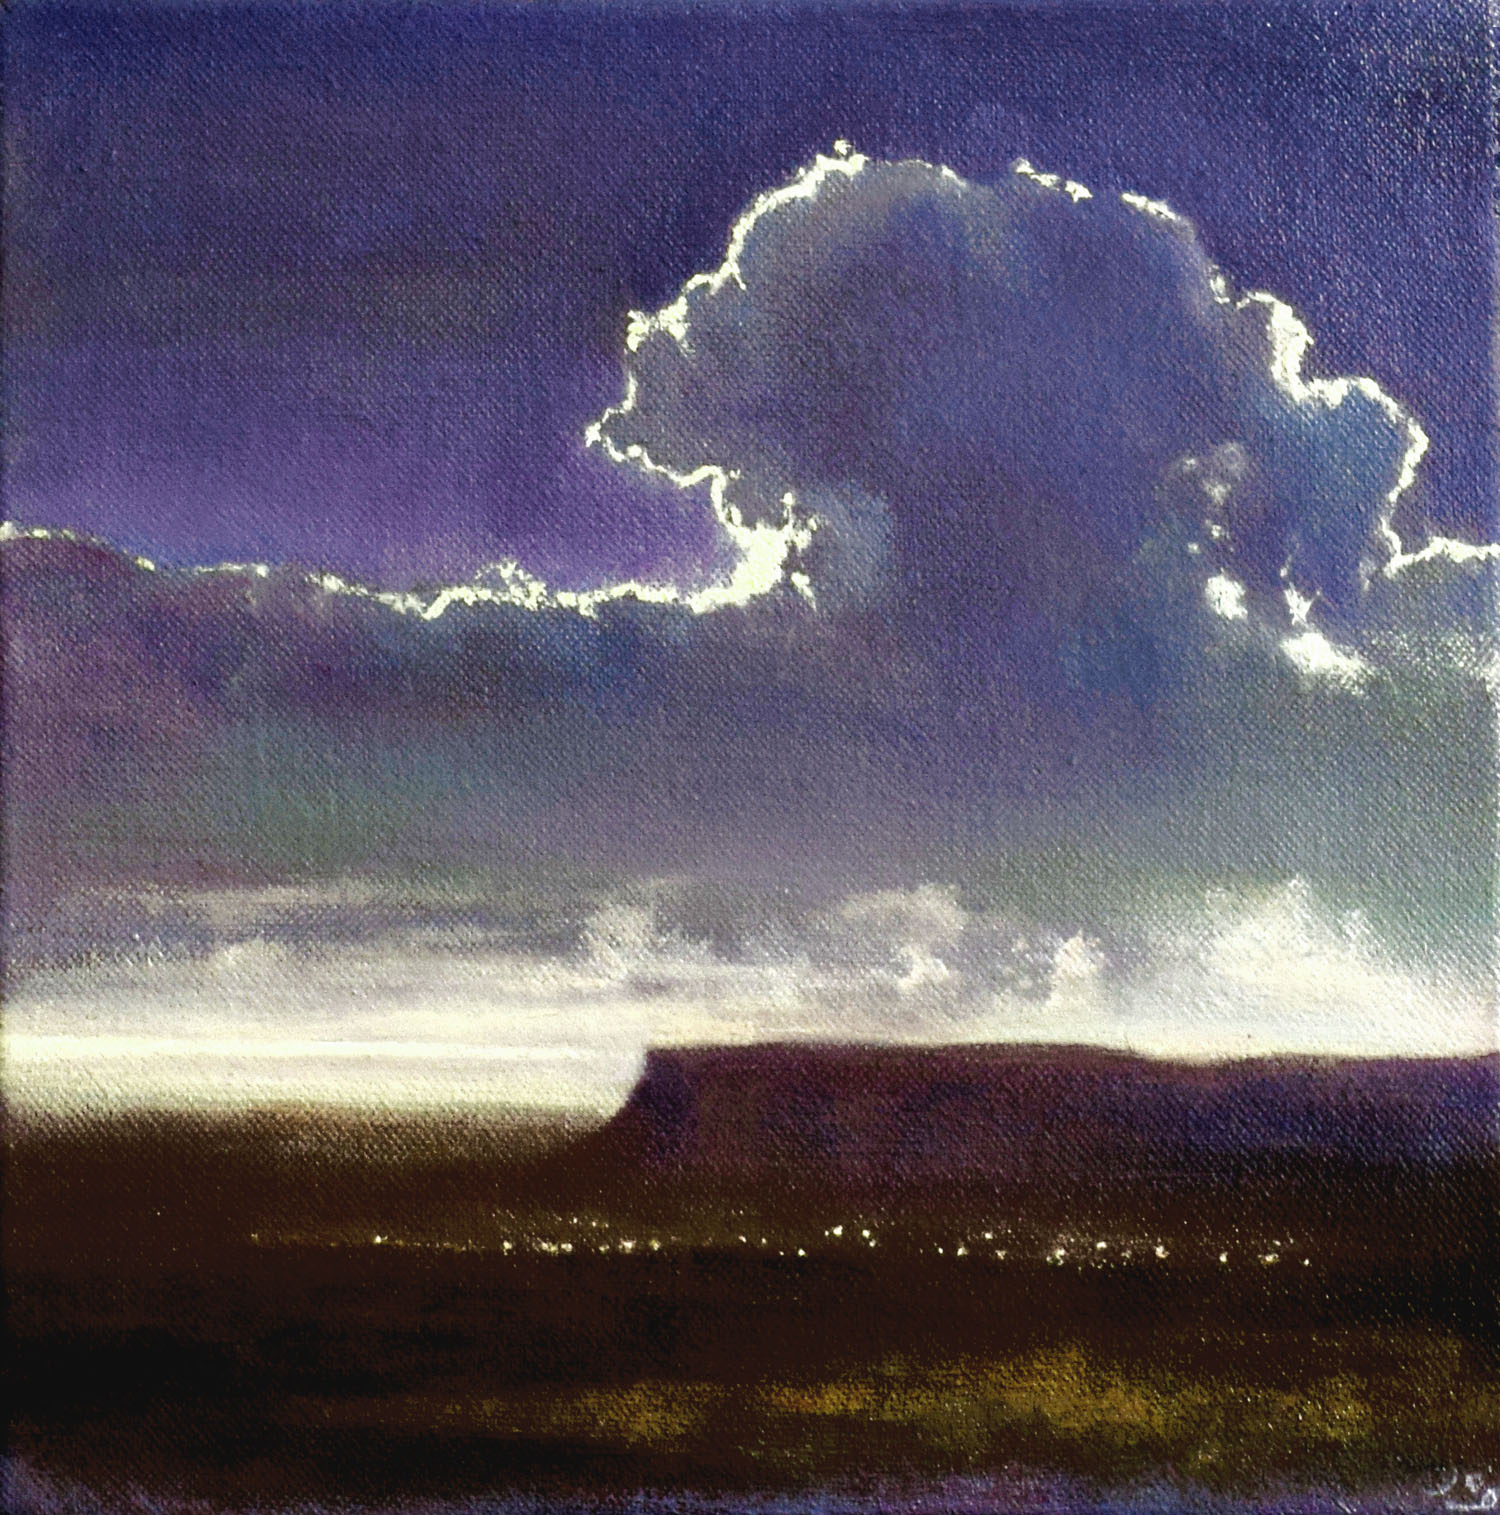 Between the Dark and Dawn by John O'Grady | A view of Ben Bulben at dawn when light rises on the horizon to reveal the subtle violet and brown colours of the land